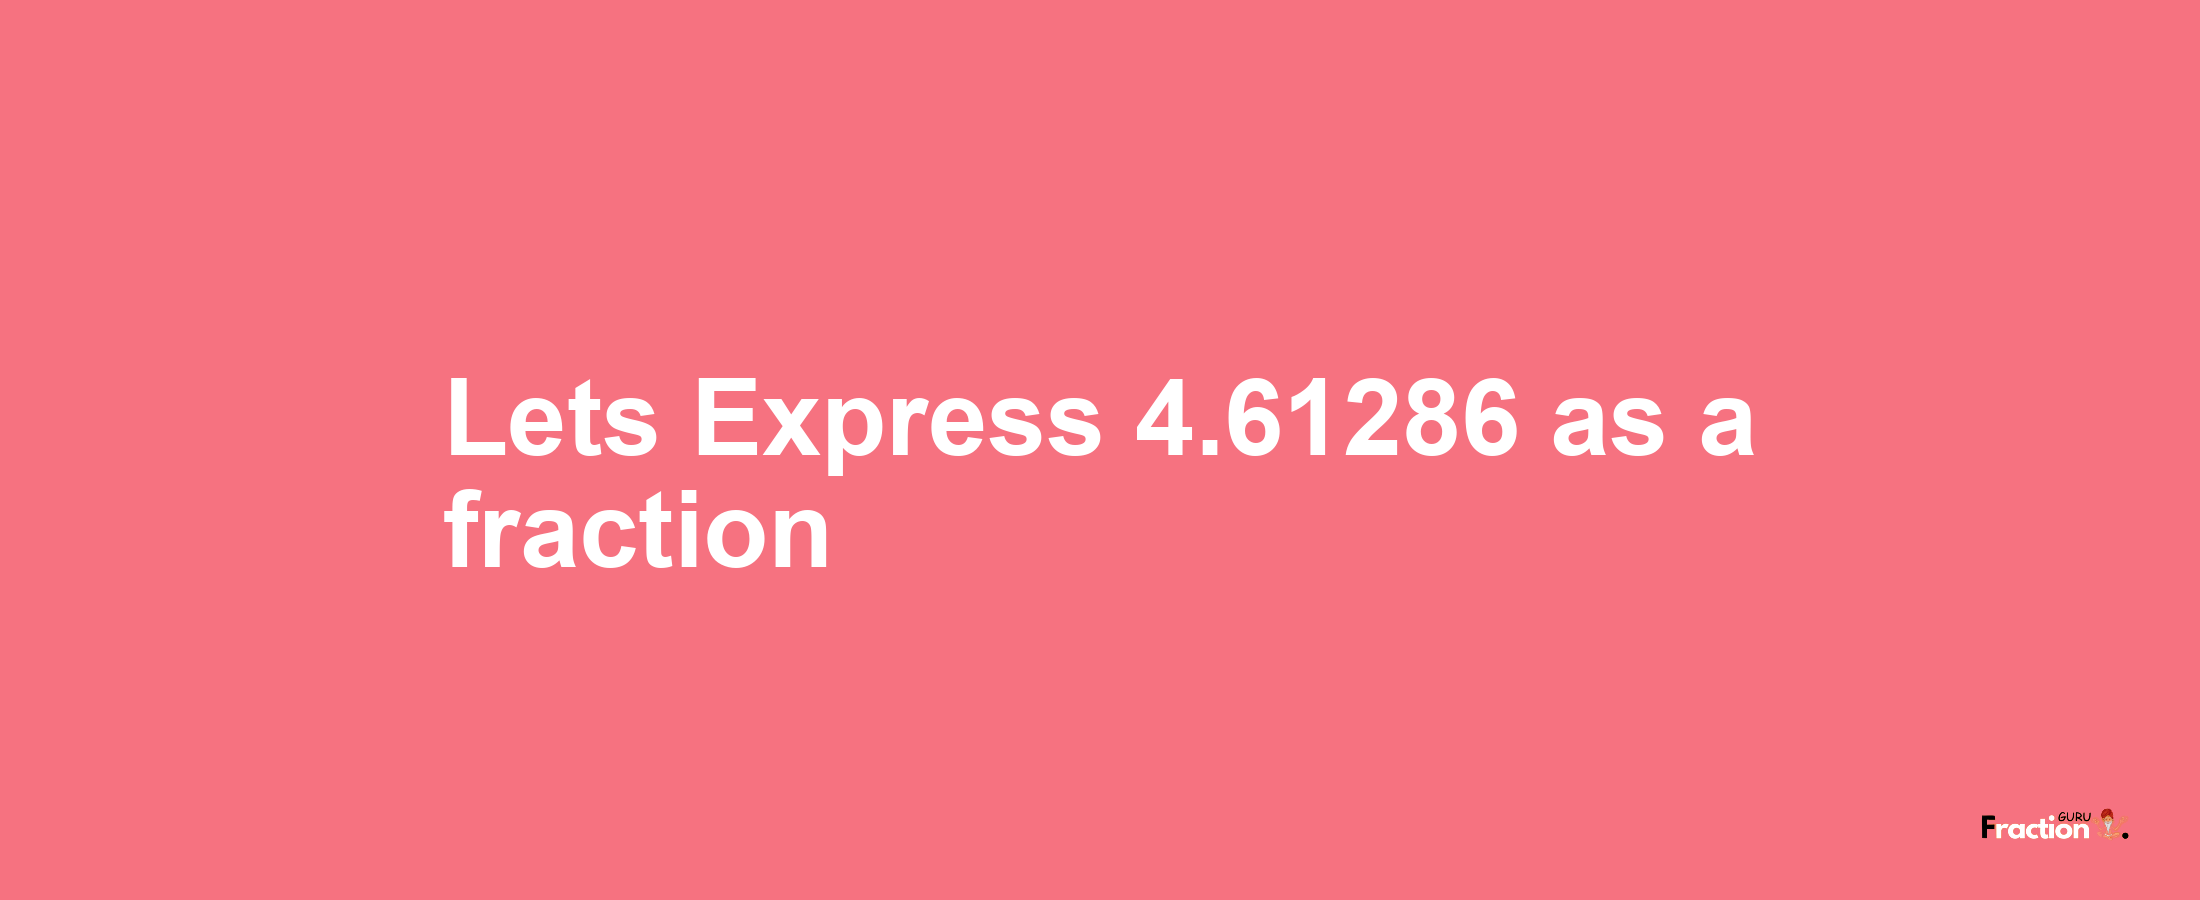 Lets Express 4.61286 as afraction